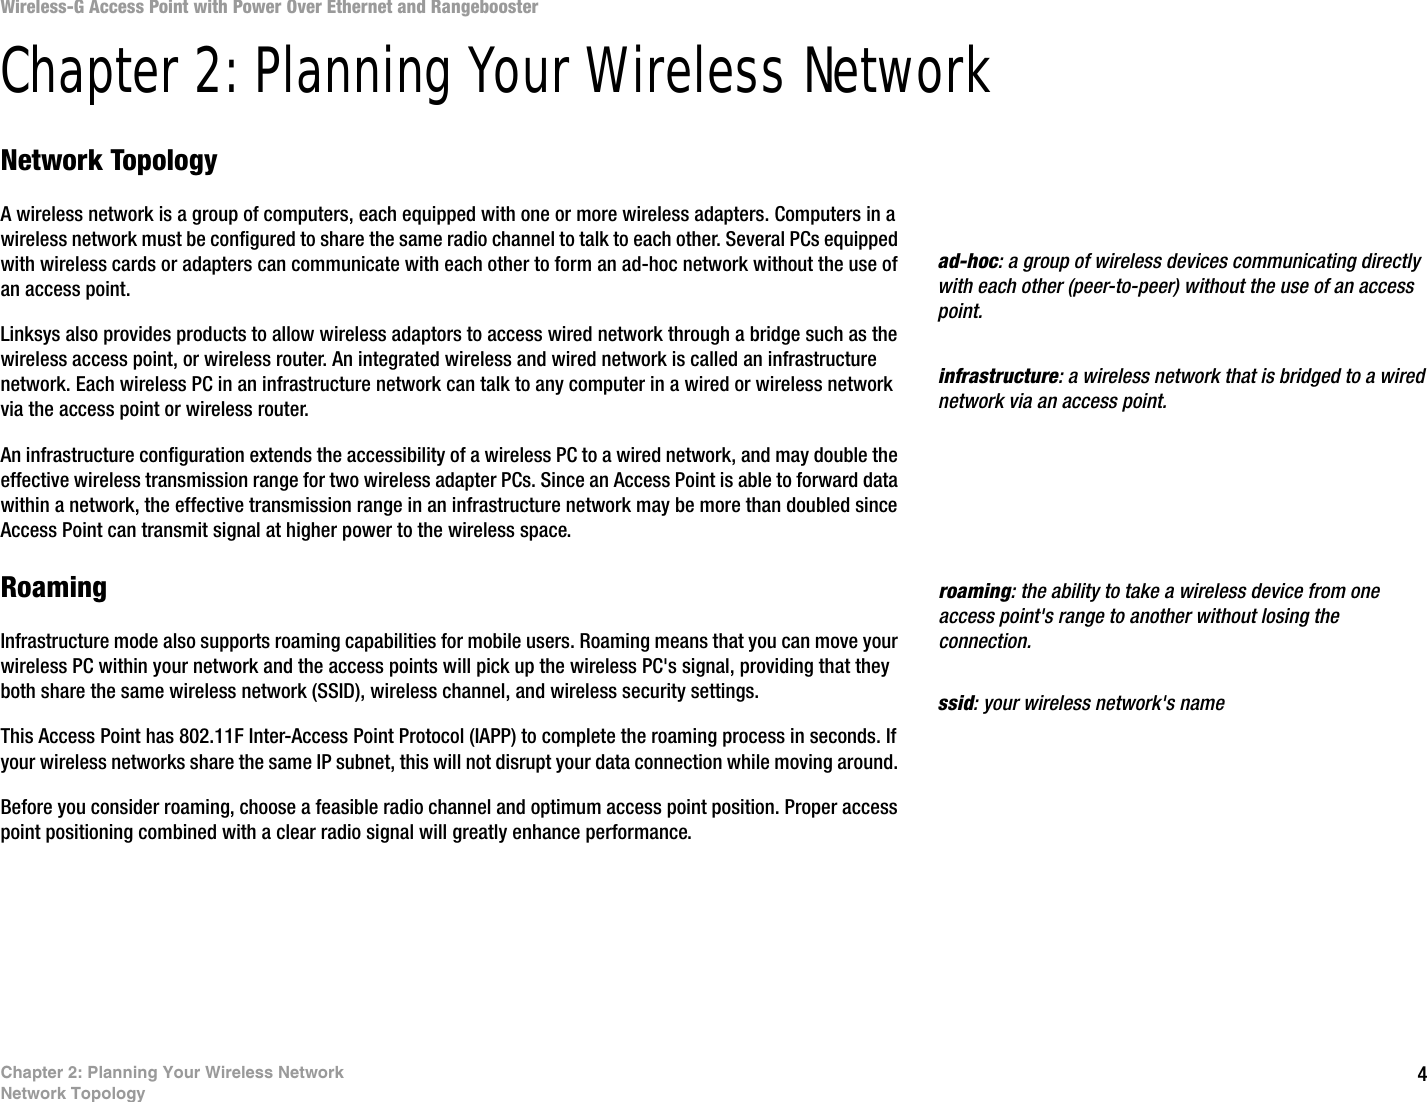 4Chapter 2: Planning Your Wireless NetworkNetwork TopologyWireless-G Access Point with Power Over Ethernet and RangeboosterChapter 2: Planning Your Wireless NetworkNetwork TopologyA wireless network is a group of computers, each equipped with one or more wireless adapters. Computers in a wireless network must be configured to share the same radio channel to talk to each other. Several PCs equipped with wireless cards or adapters can communicate with each other to form an ad-hoc network without the use of an access point.Linksys also provides products to allow wireless adaptors to access wired network through a bridge such as the wireless access point, or wireless router. An integrated wireless and wired network is called an infrastructure network. Each wireless PC in an infrastructure network can talk to any computer in a wired or wireless network via the access point or wireless router.An infrastructure configuration extends the accessibility of a wireless PC to a wired network, and may double the effective wireless transmission range for two wireless adapter PCs. Since an Access Point is able to forward data within a network, the effective transmission range in an infrastructure network may be more than doubled since Access Point can transmit signal at higher power to the wireless space.RoamingInfrastructure mode also supports roaming capabilities for mobile users. Roaming means that you can move your wireless PC within your network and the access points will pick up the wireless PC&apos;s signal, providing that they both share the same wireless network (SSID), wireless channel, and wireless security settings.This Access Point has 802.11F Inter-Access Point Protocol (IAPP) to complete the roaming process in seconds. If your wireless networks share the same IP subnet, this will not disrupt your data connection while moving around. Before you consider roaming, choose a feasible radio channel and optimum access point position. Proper access point positioning combined with a clear radio signal will greatly enhance performance.infrastructure: a wireless network that is bridged to a wired network via an access point.ad-hoc: a group of wireless devices communicating directly with each other (peer-to-peer) without the use of an access point.roaming: the ability to take a wireless device from one access point&apos;s range to another without losing the connection.ssid: your wireless network&apos;s name